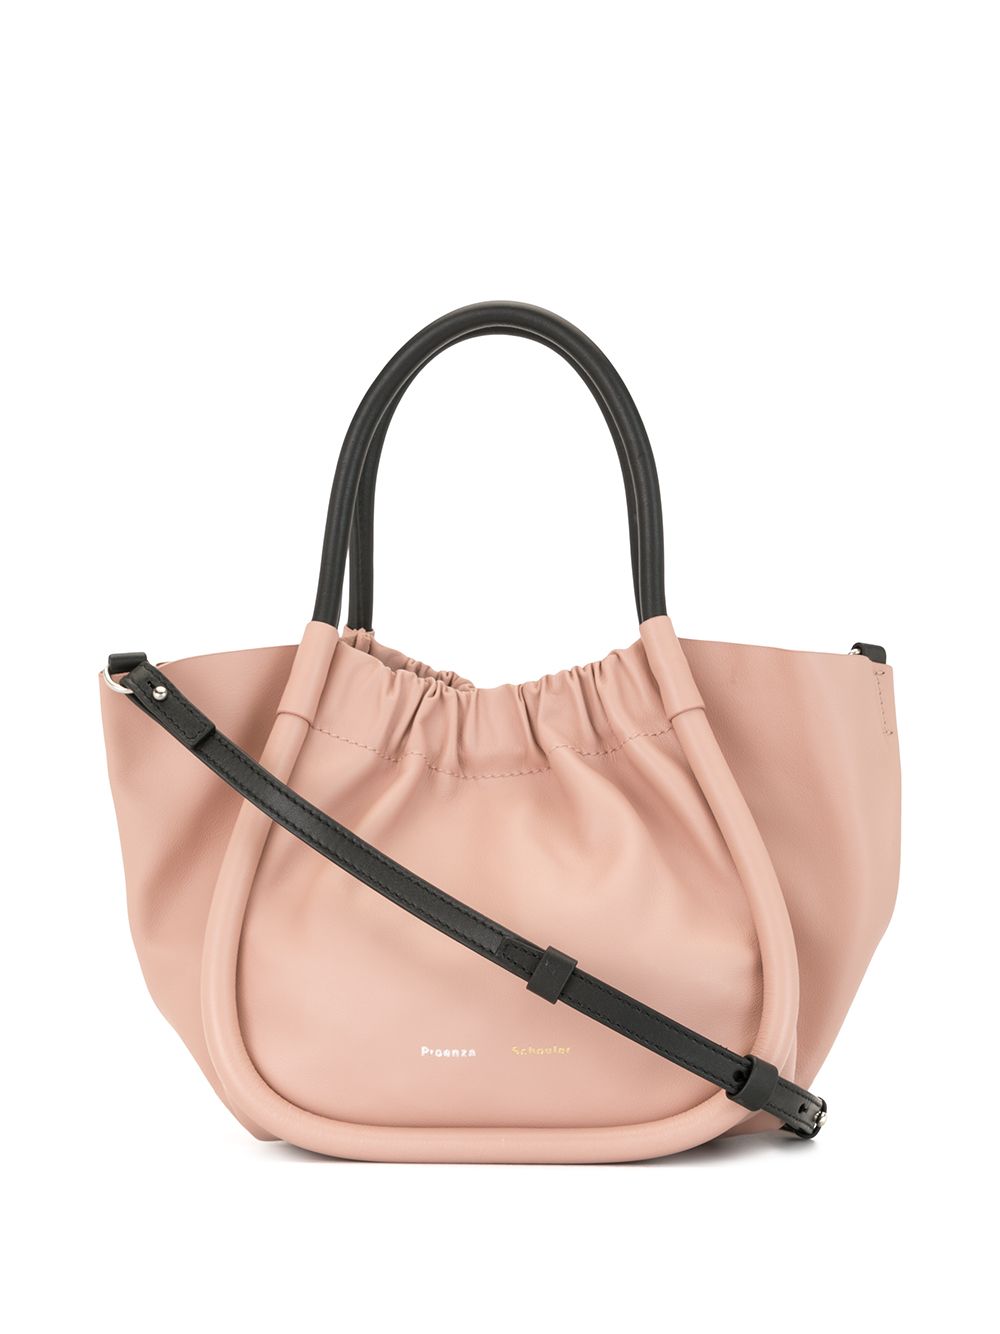 PROENZA SCHOULER SMALL RUCHED TOTE BAG